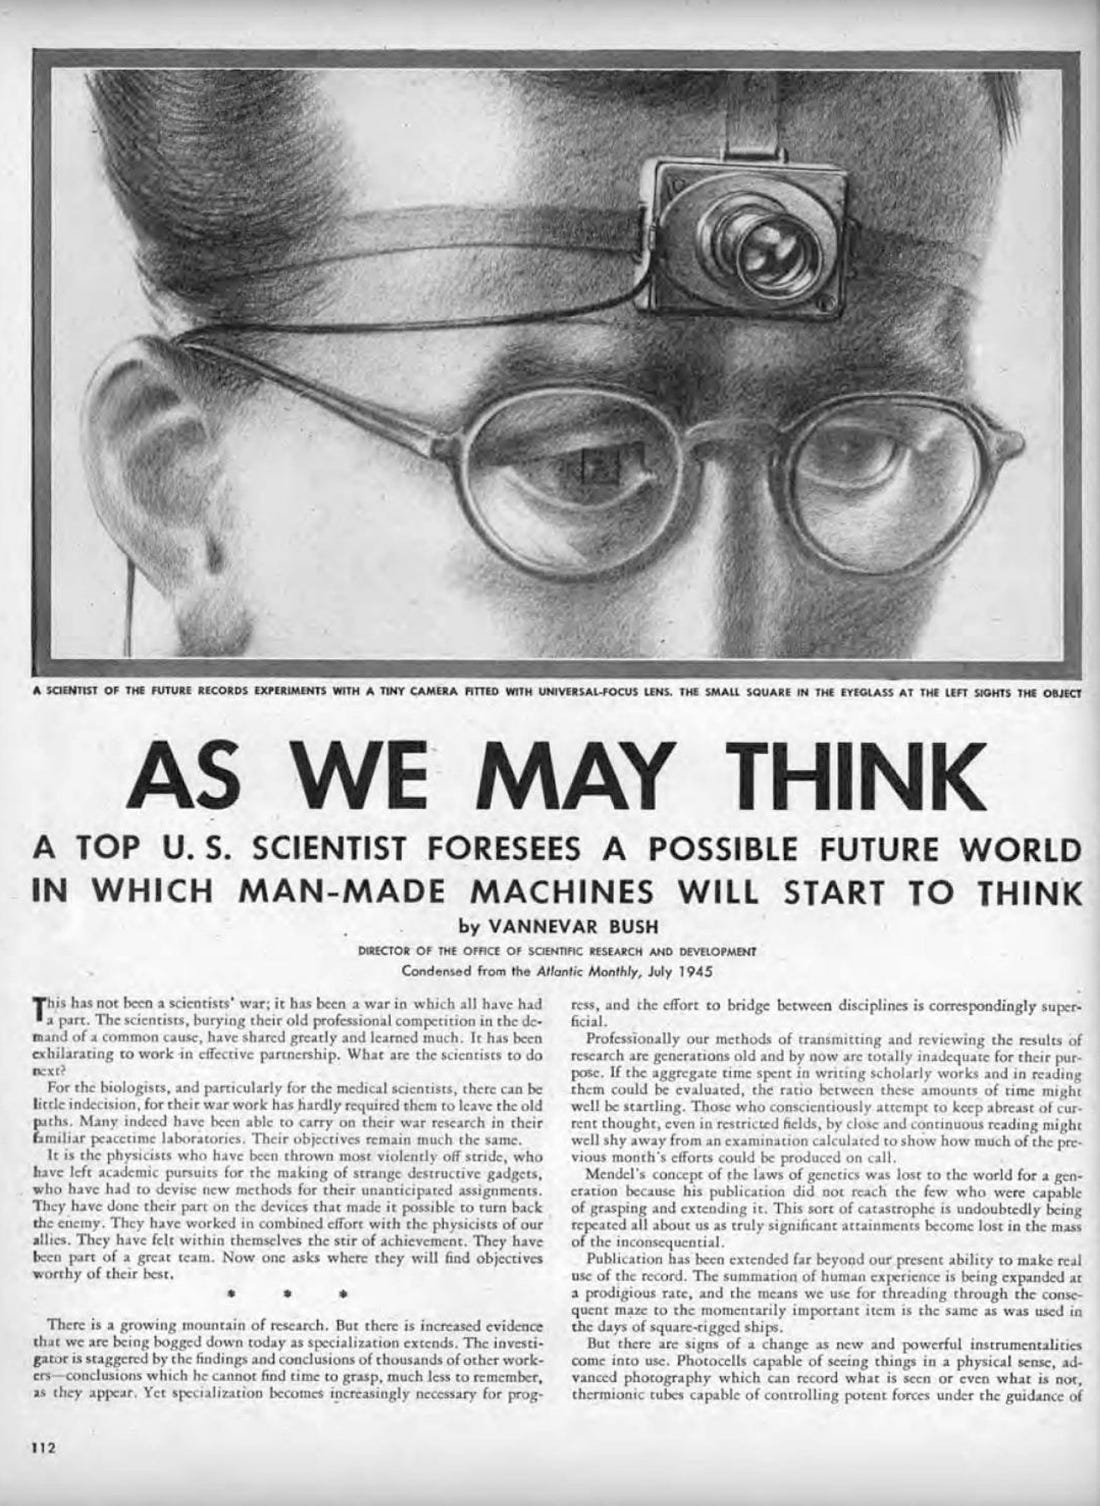 As We May Think "A Top US Scientist forsees a possible future world in which made man machines swill start to think"